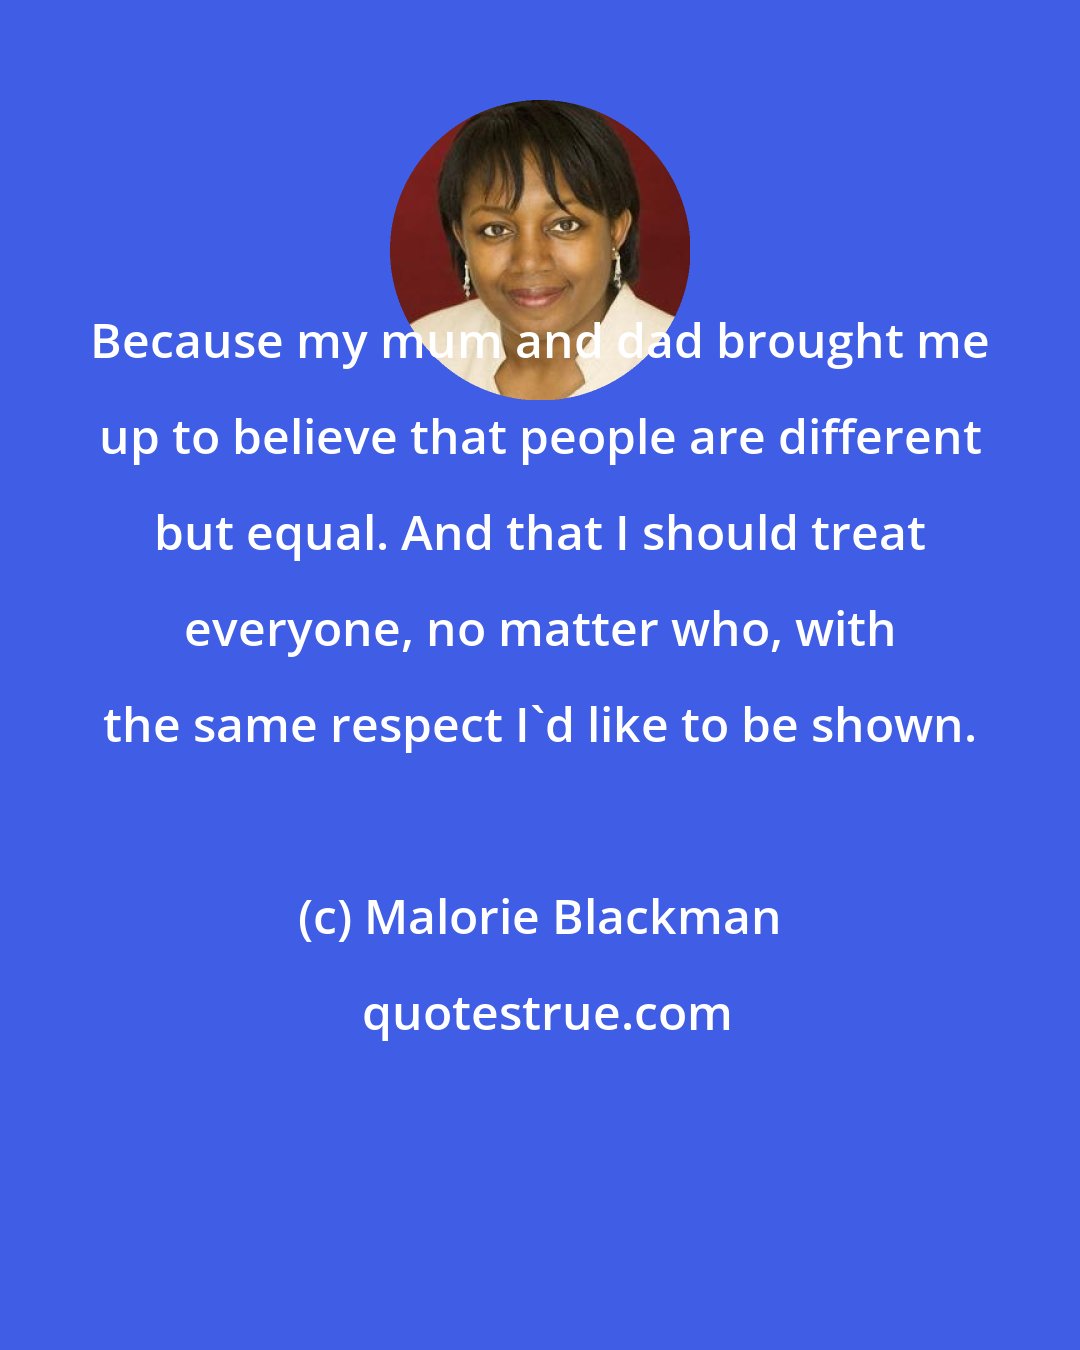 Malorie Blackman: Because my mum and dad brought me up to believe that people are different but equal. And that I should treat everyone, no matter who, with the same respect I'd like to be shown.